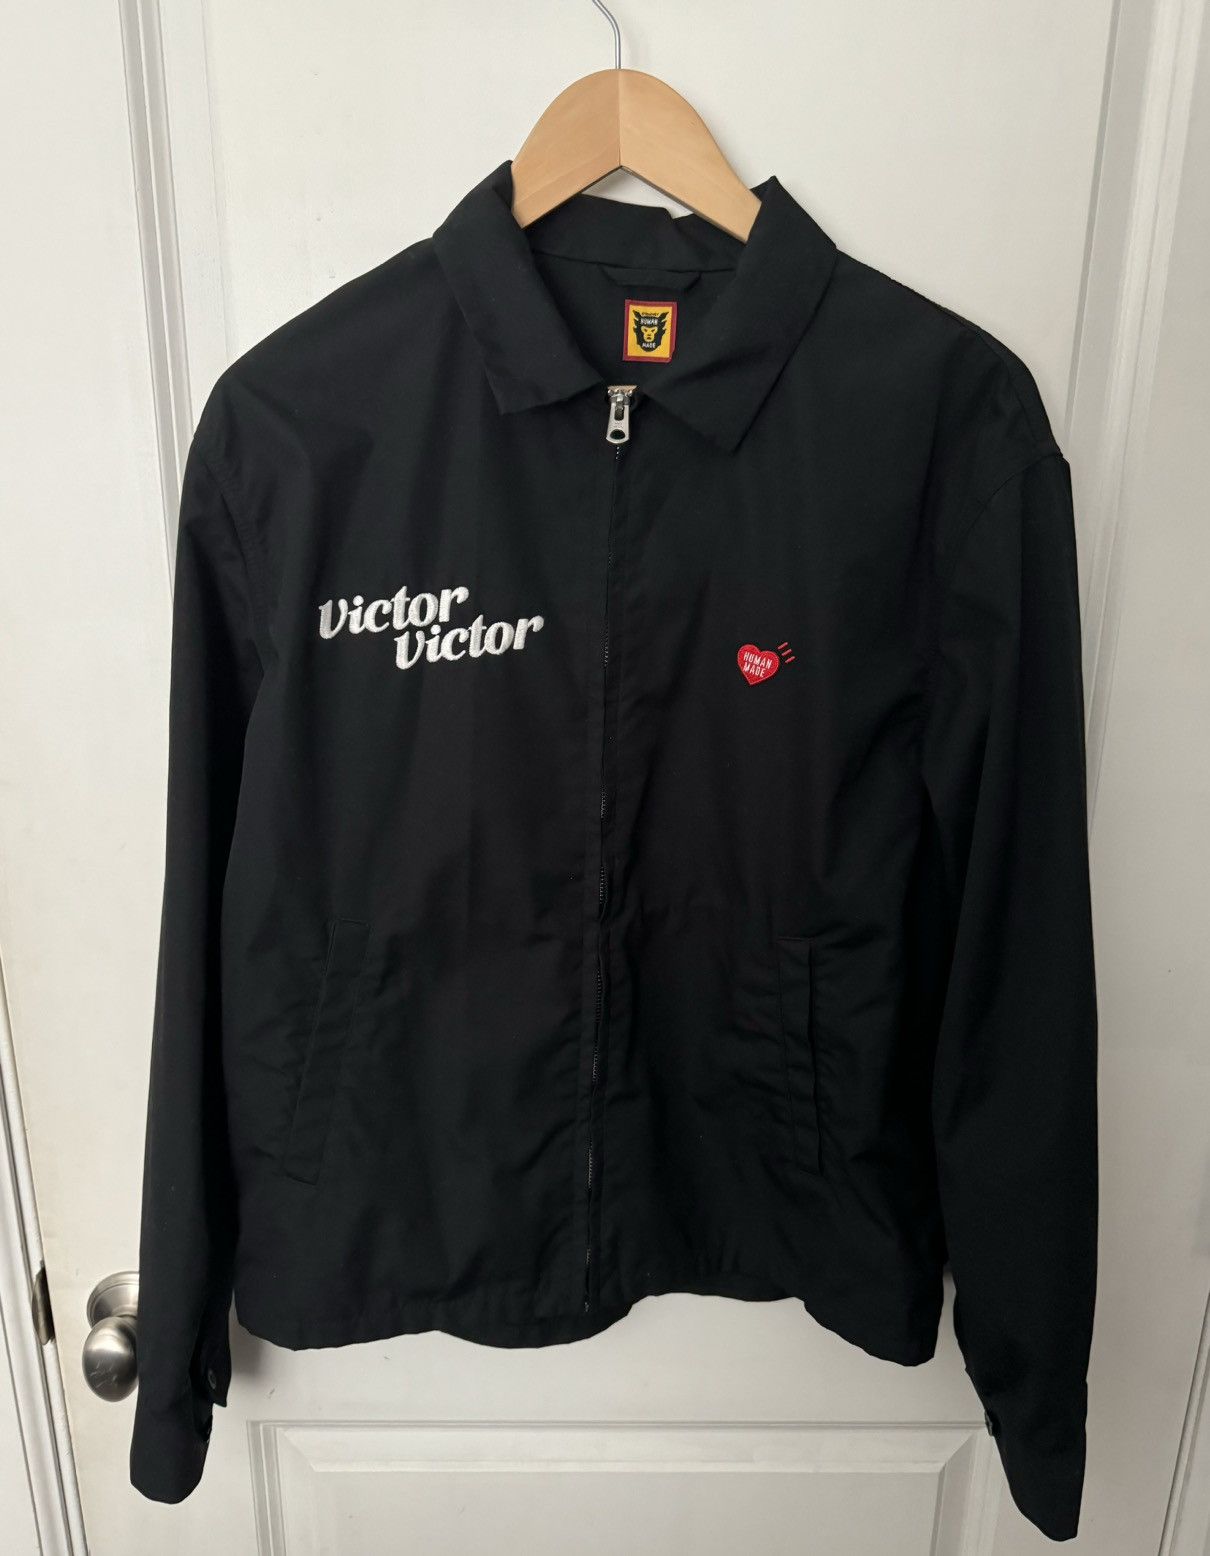 Human Made Human Made x Victor Victor Drizzler Jacket | Grailed